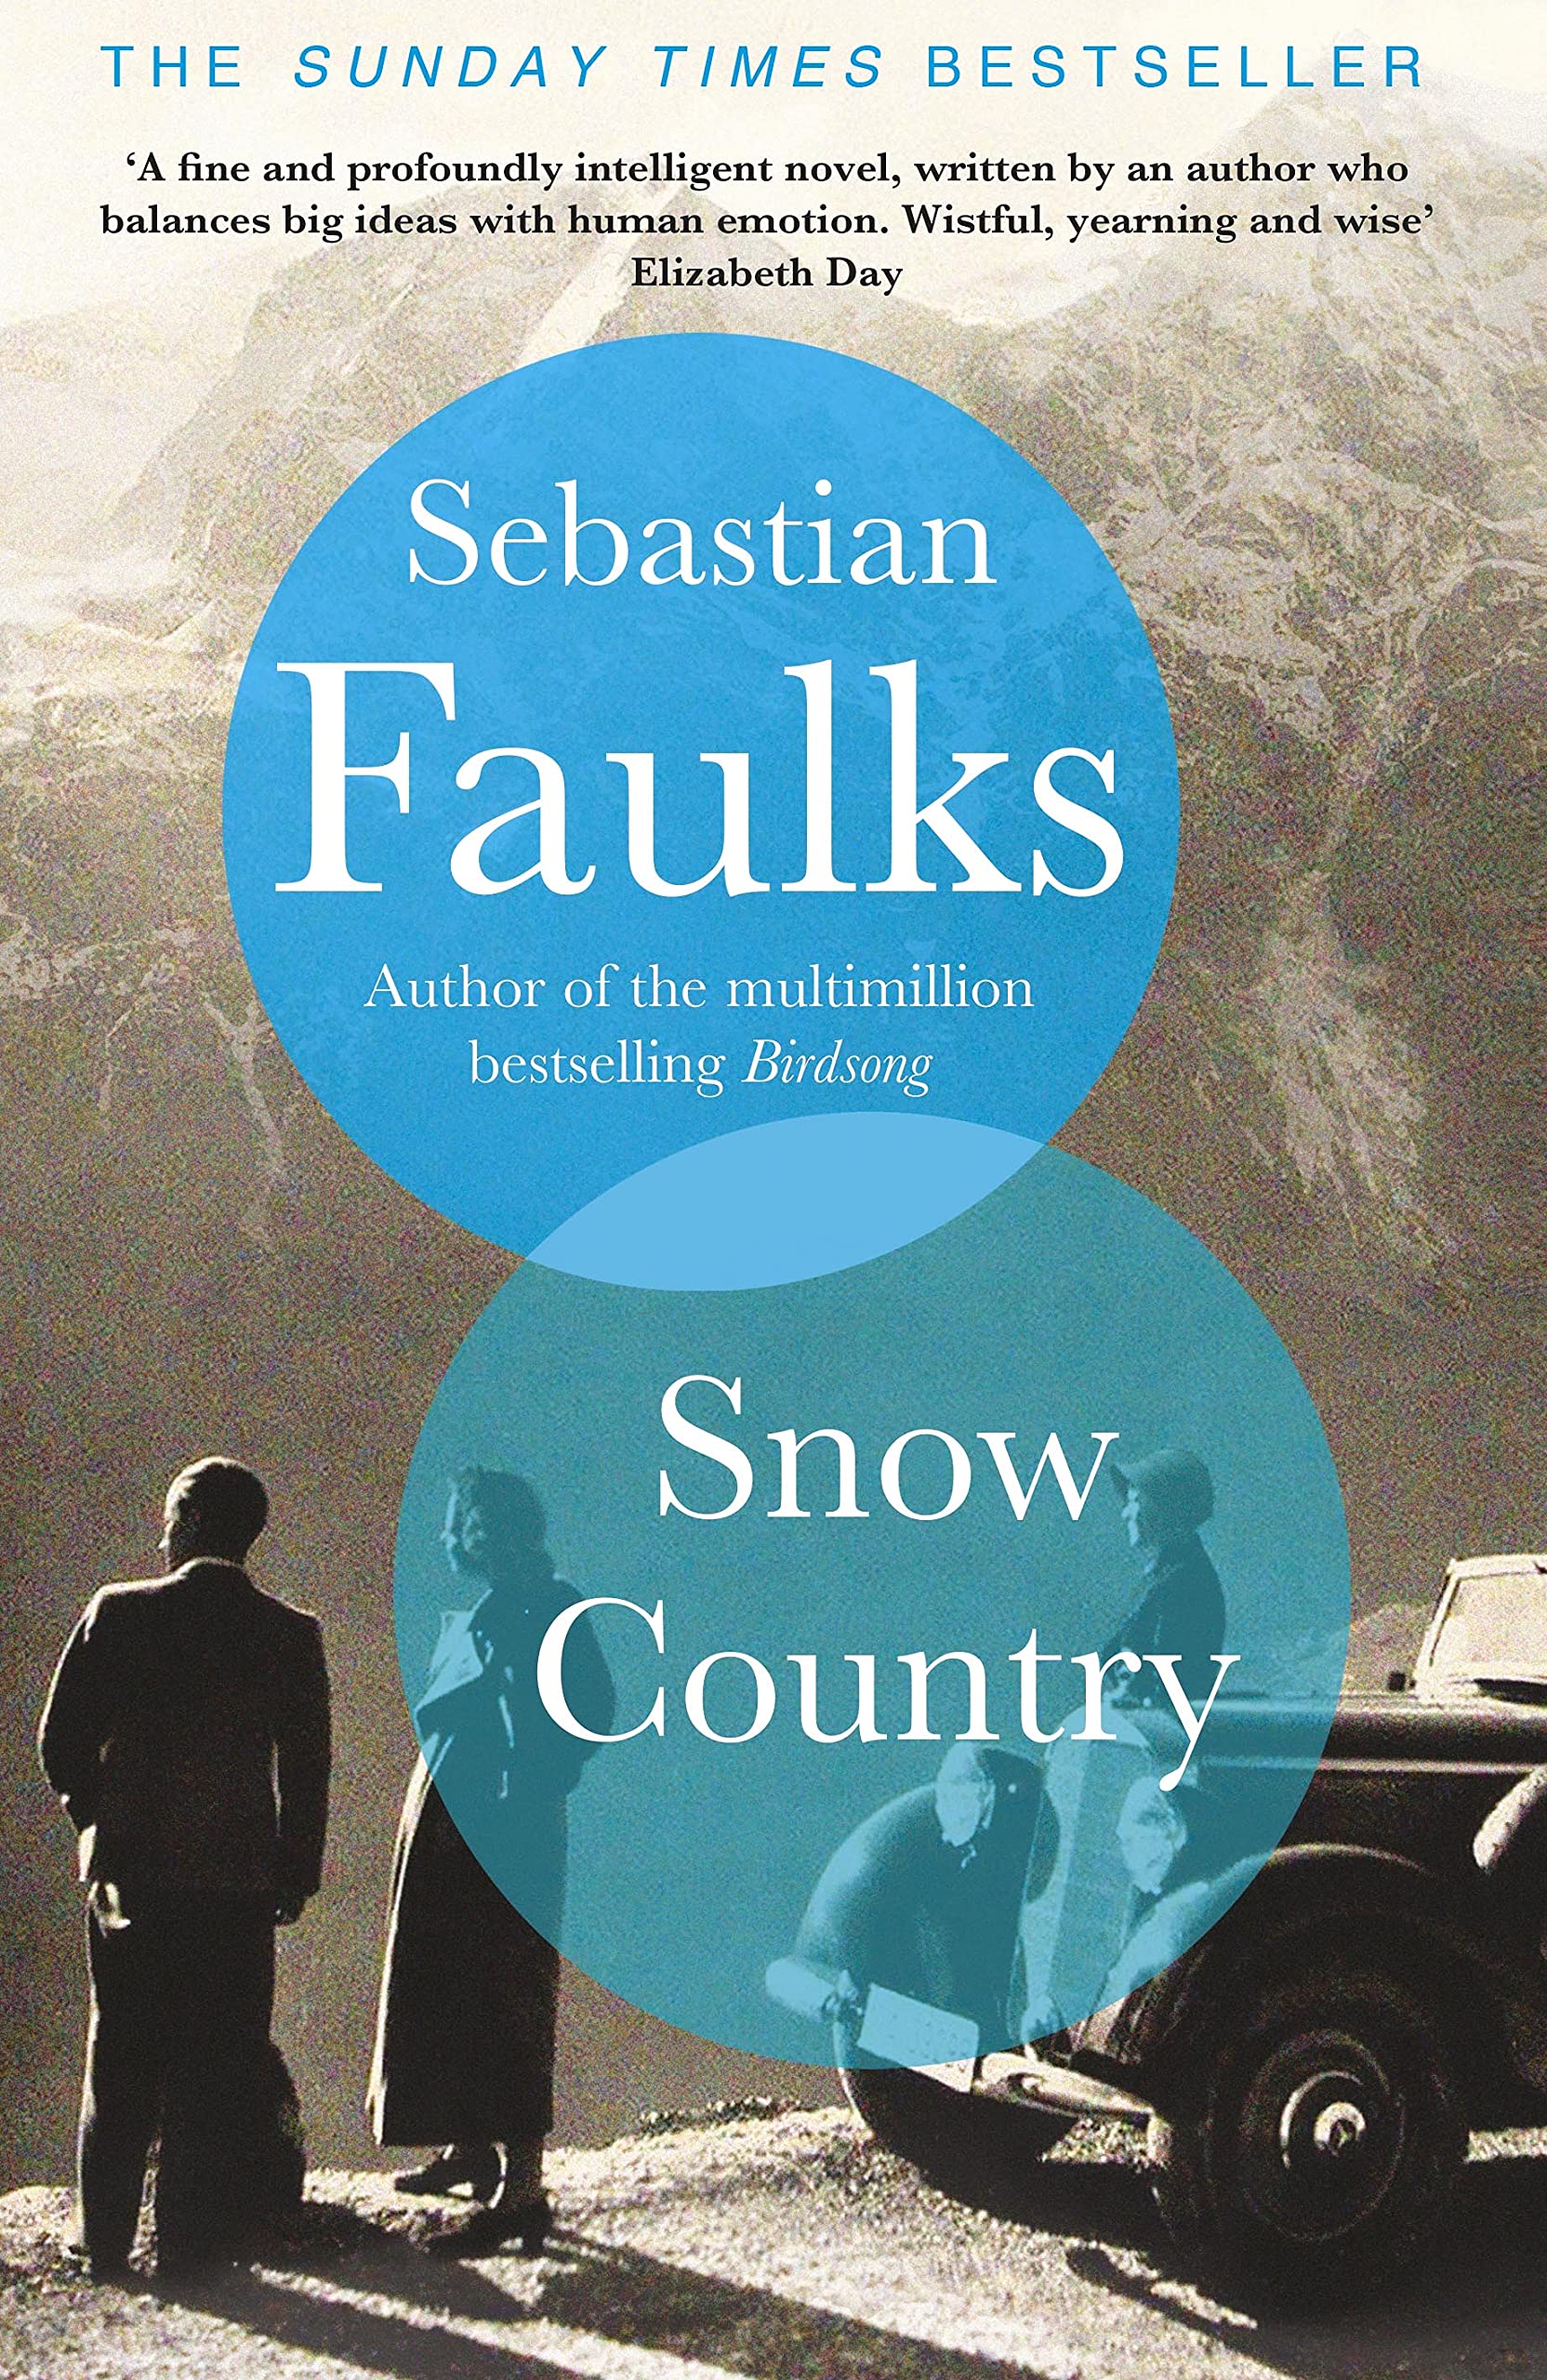 Sebastian Faulks’s ‘Snow Country’ is the second book in his planned Austrian trilogy and examines the horror of conflict